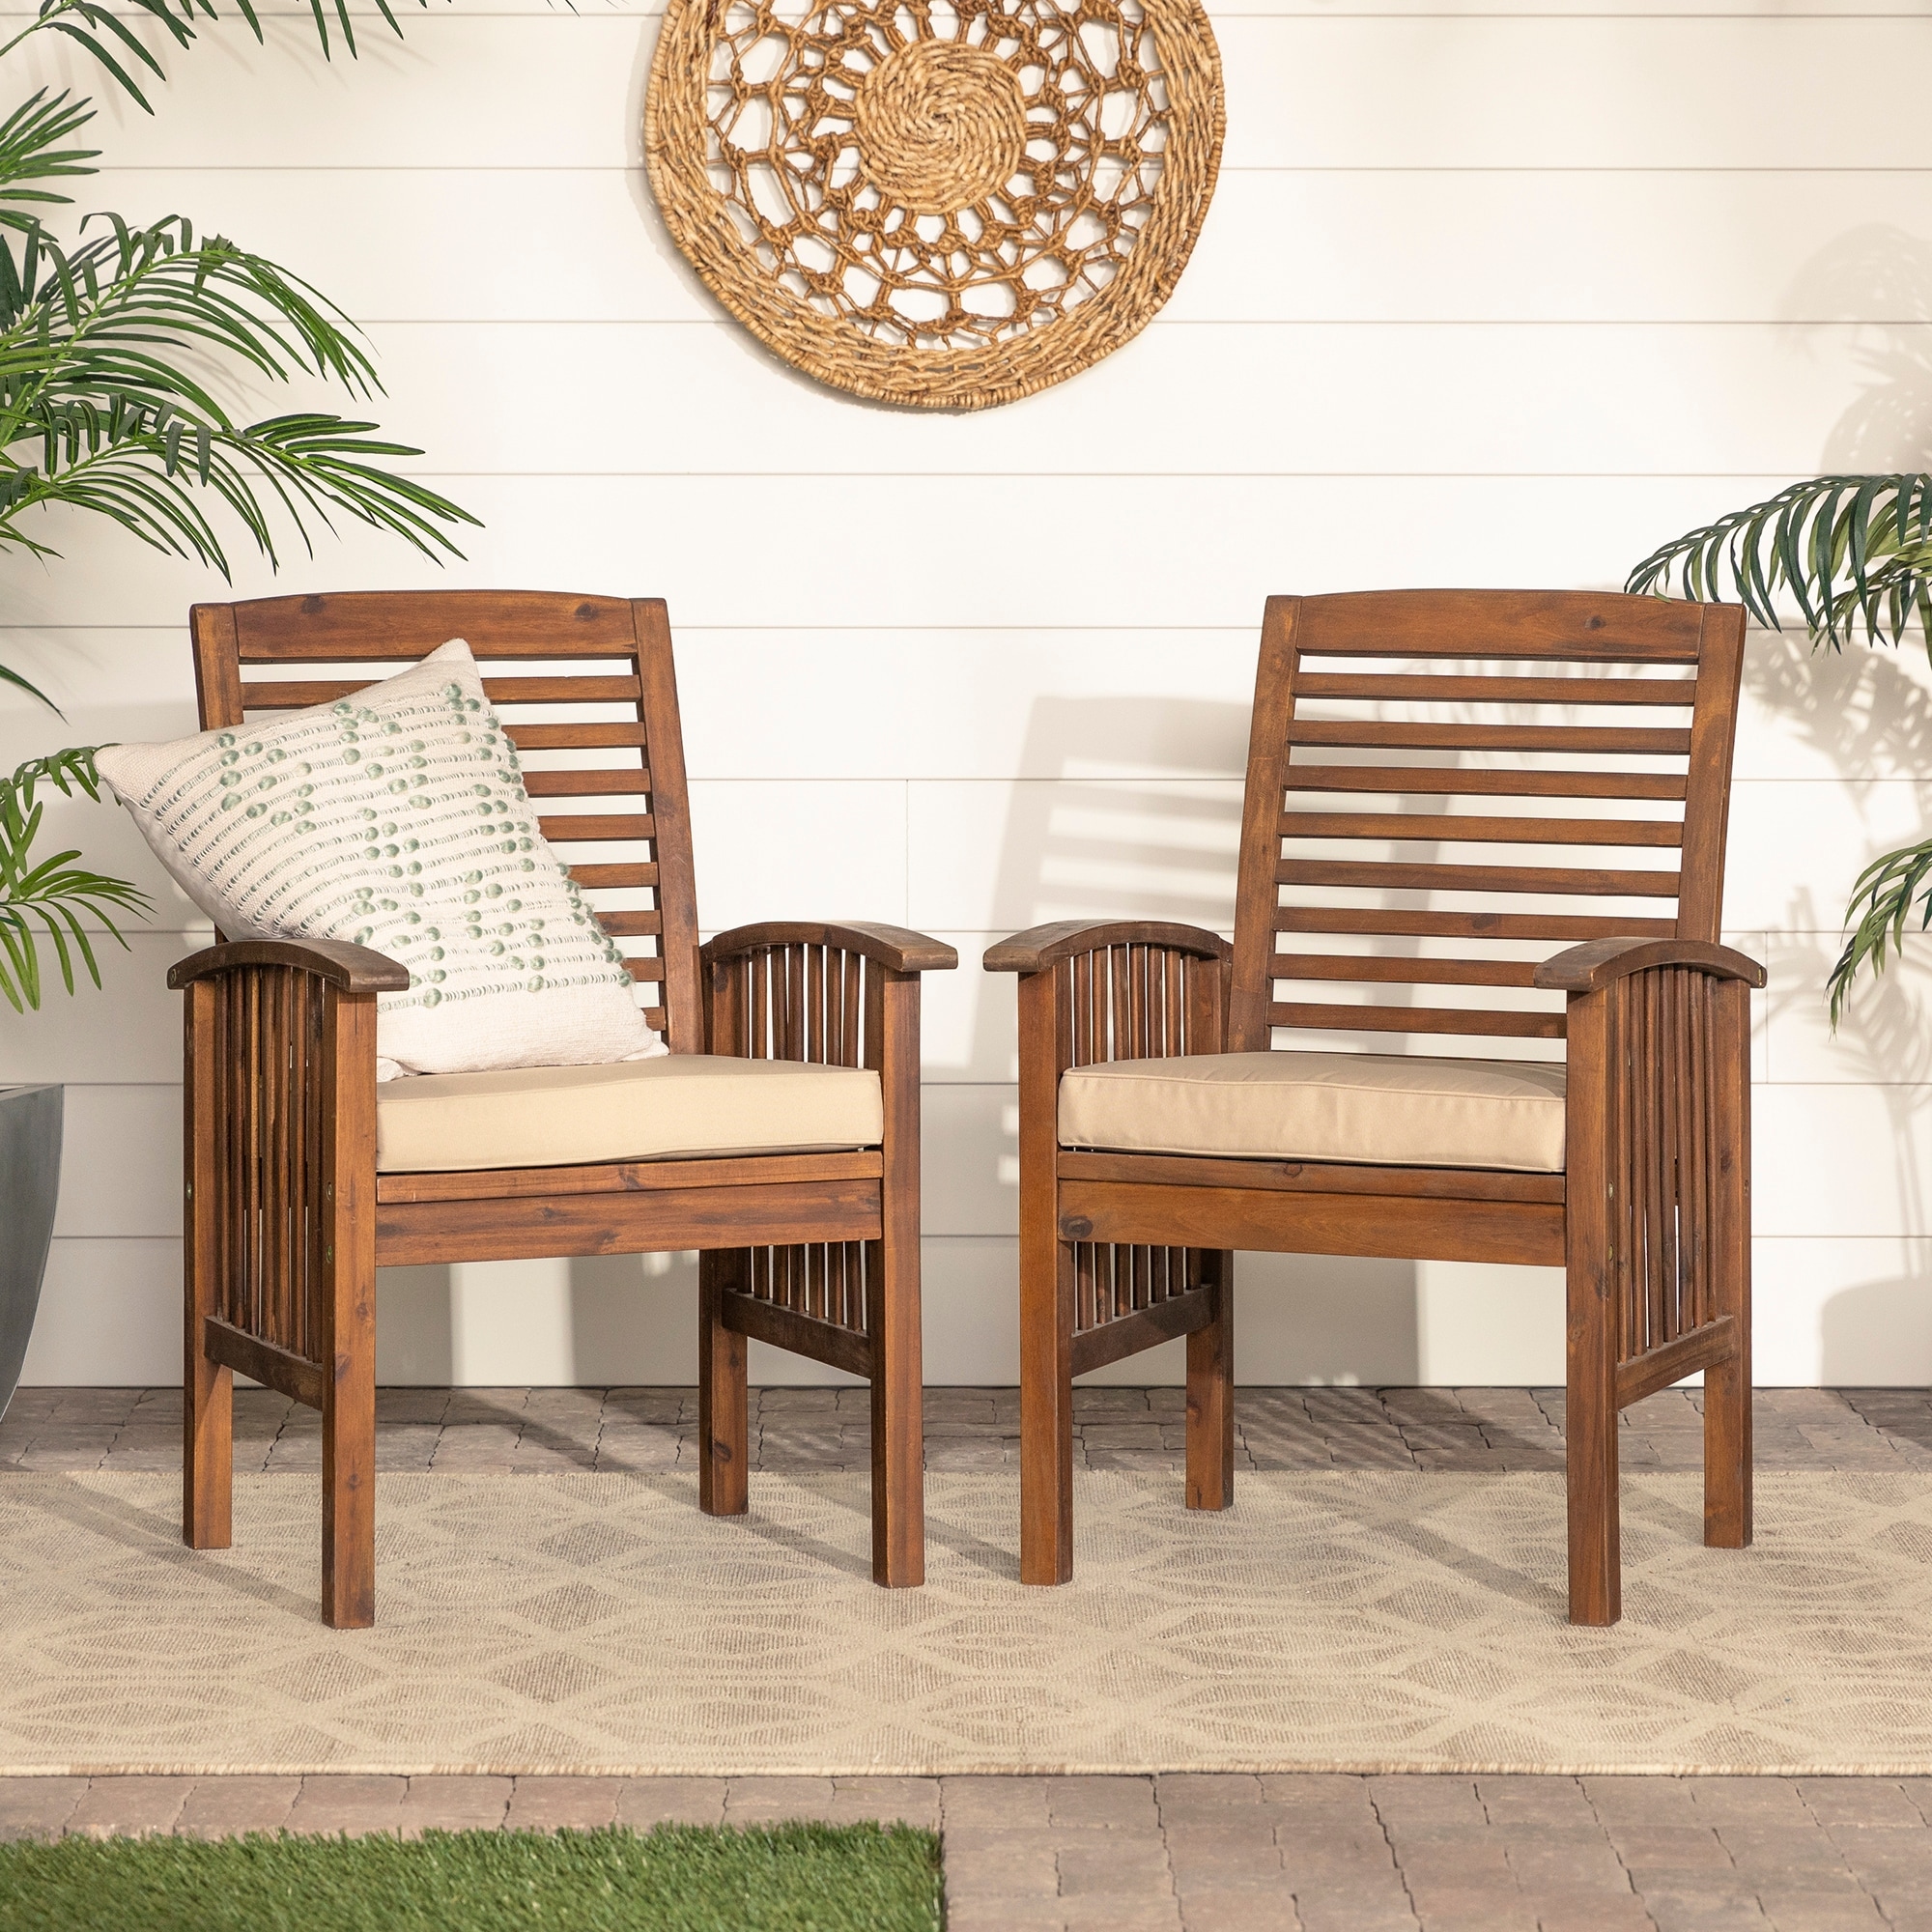 Middlebrook Surfside Acacia Wood Outdoor Chairs  Set Of 2